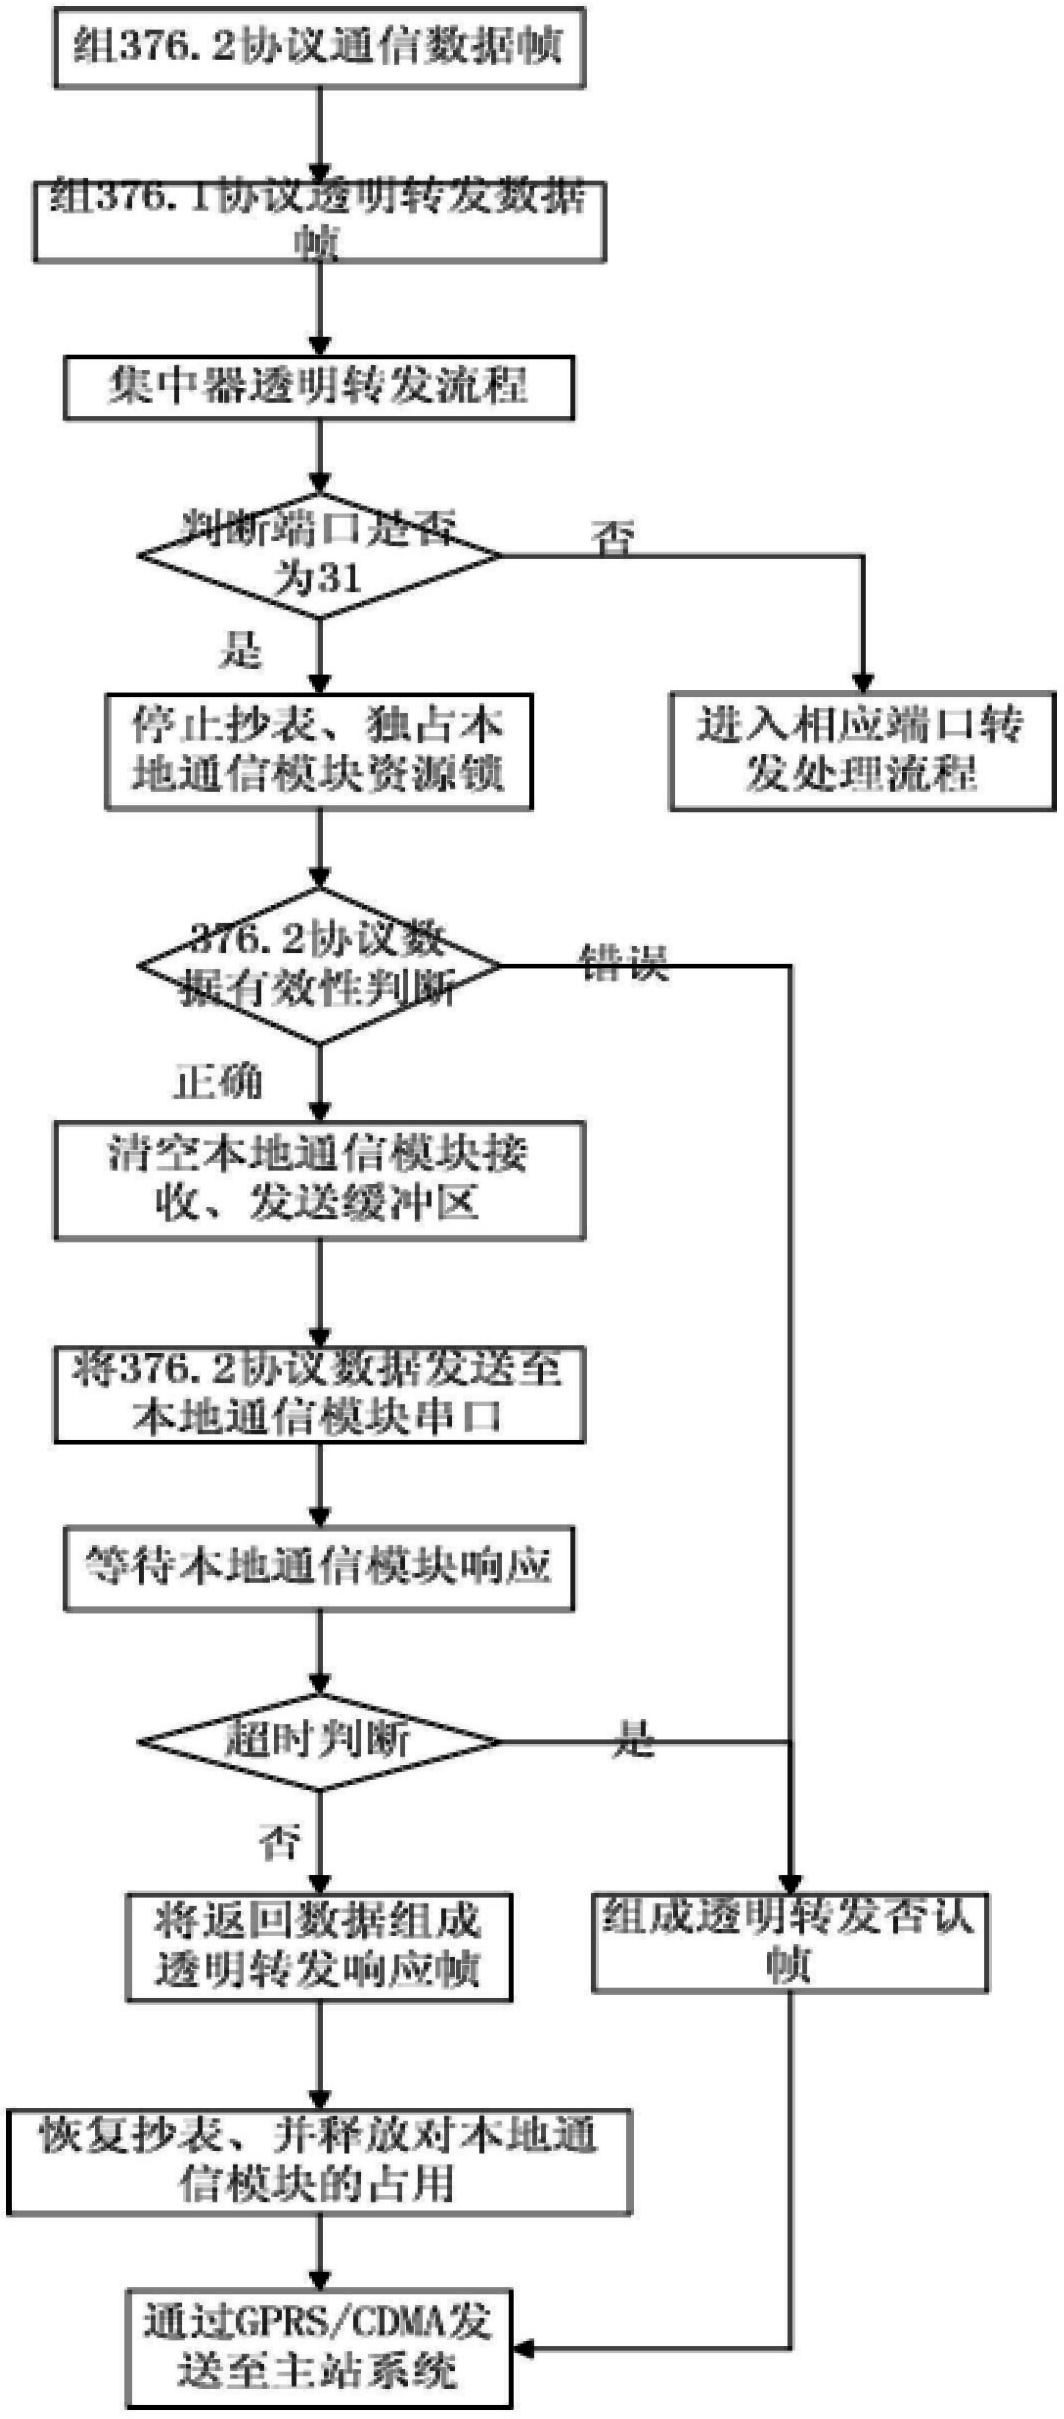 Method for remotely communicating main station system and local communication module of concentrator